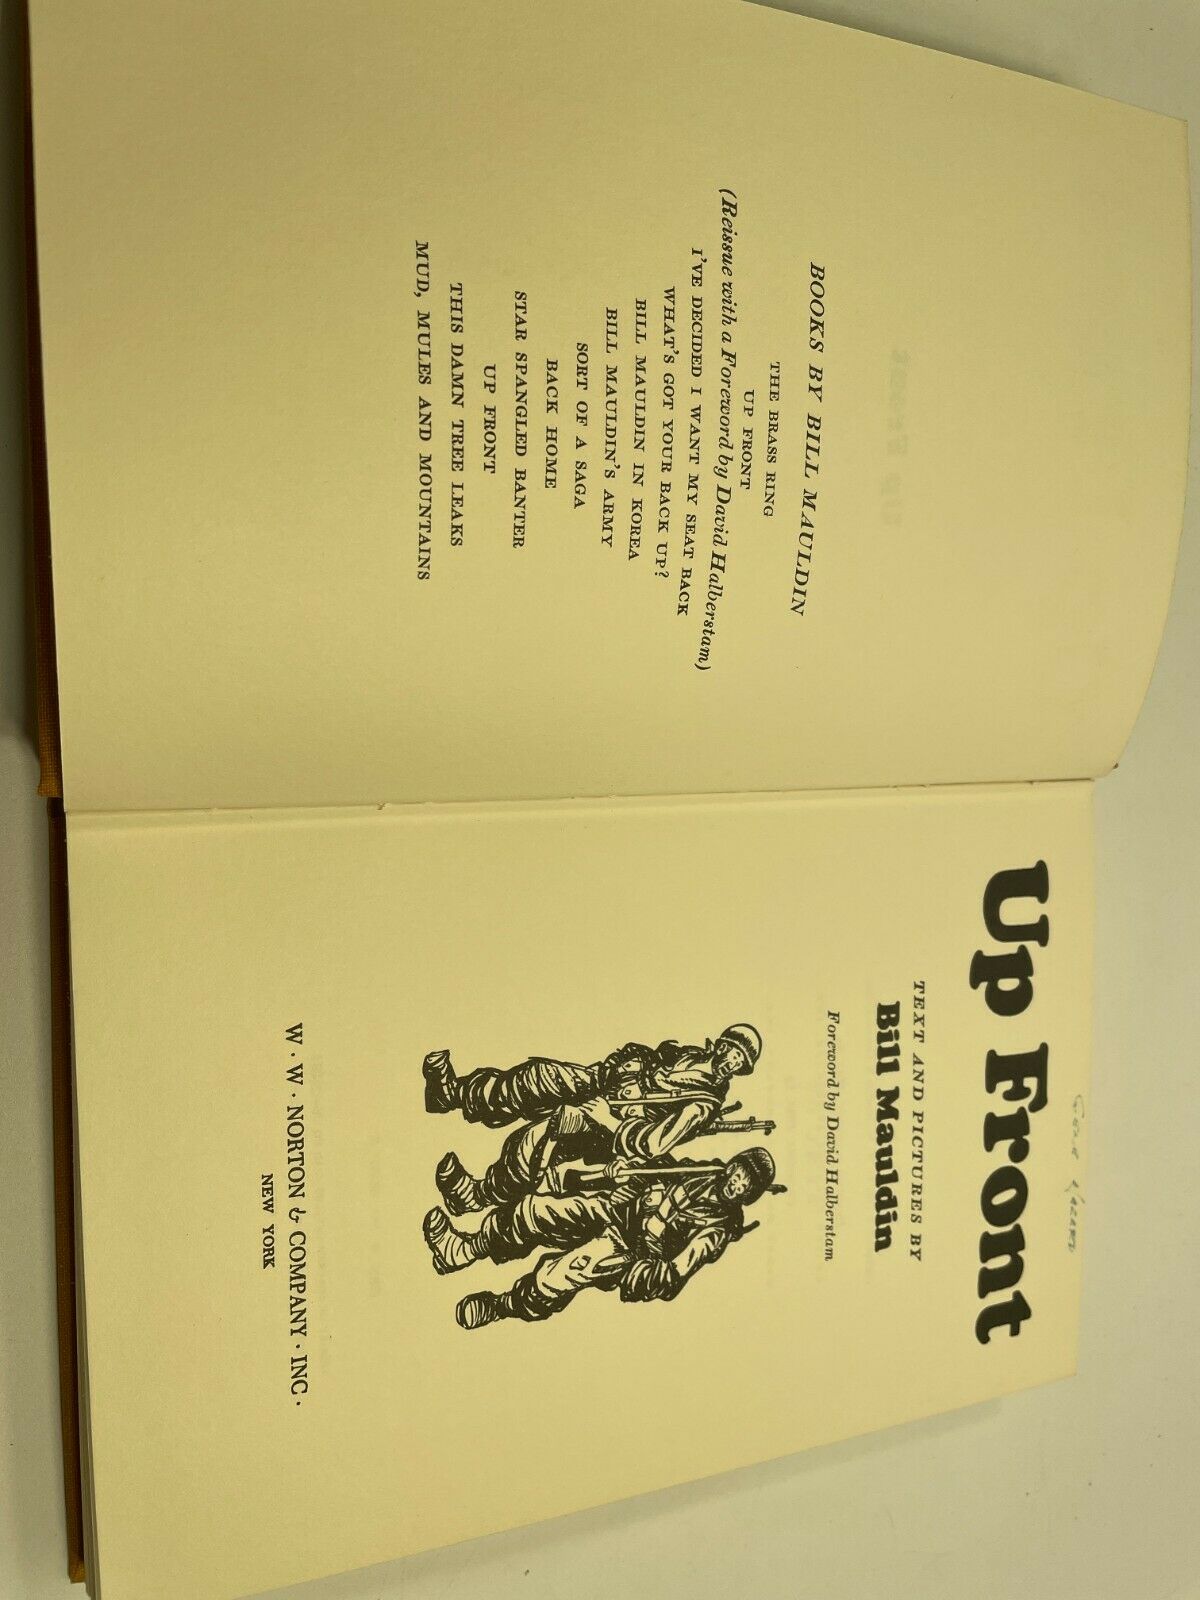 Up Front  by Bill Mauldin 1968 Re-Issued with an Intro by David Halberstam